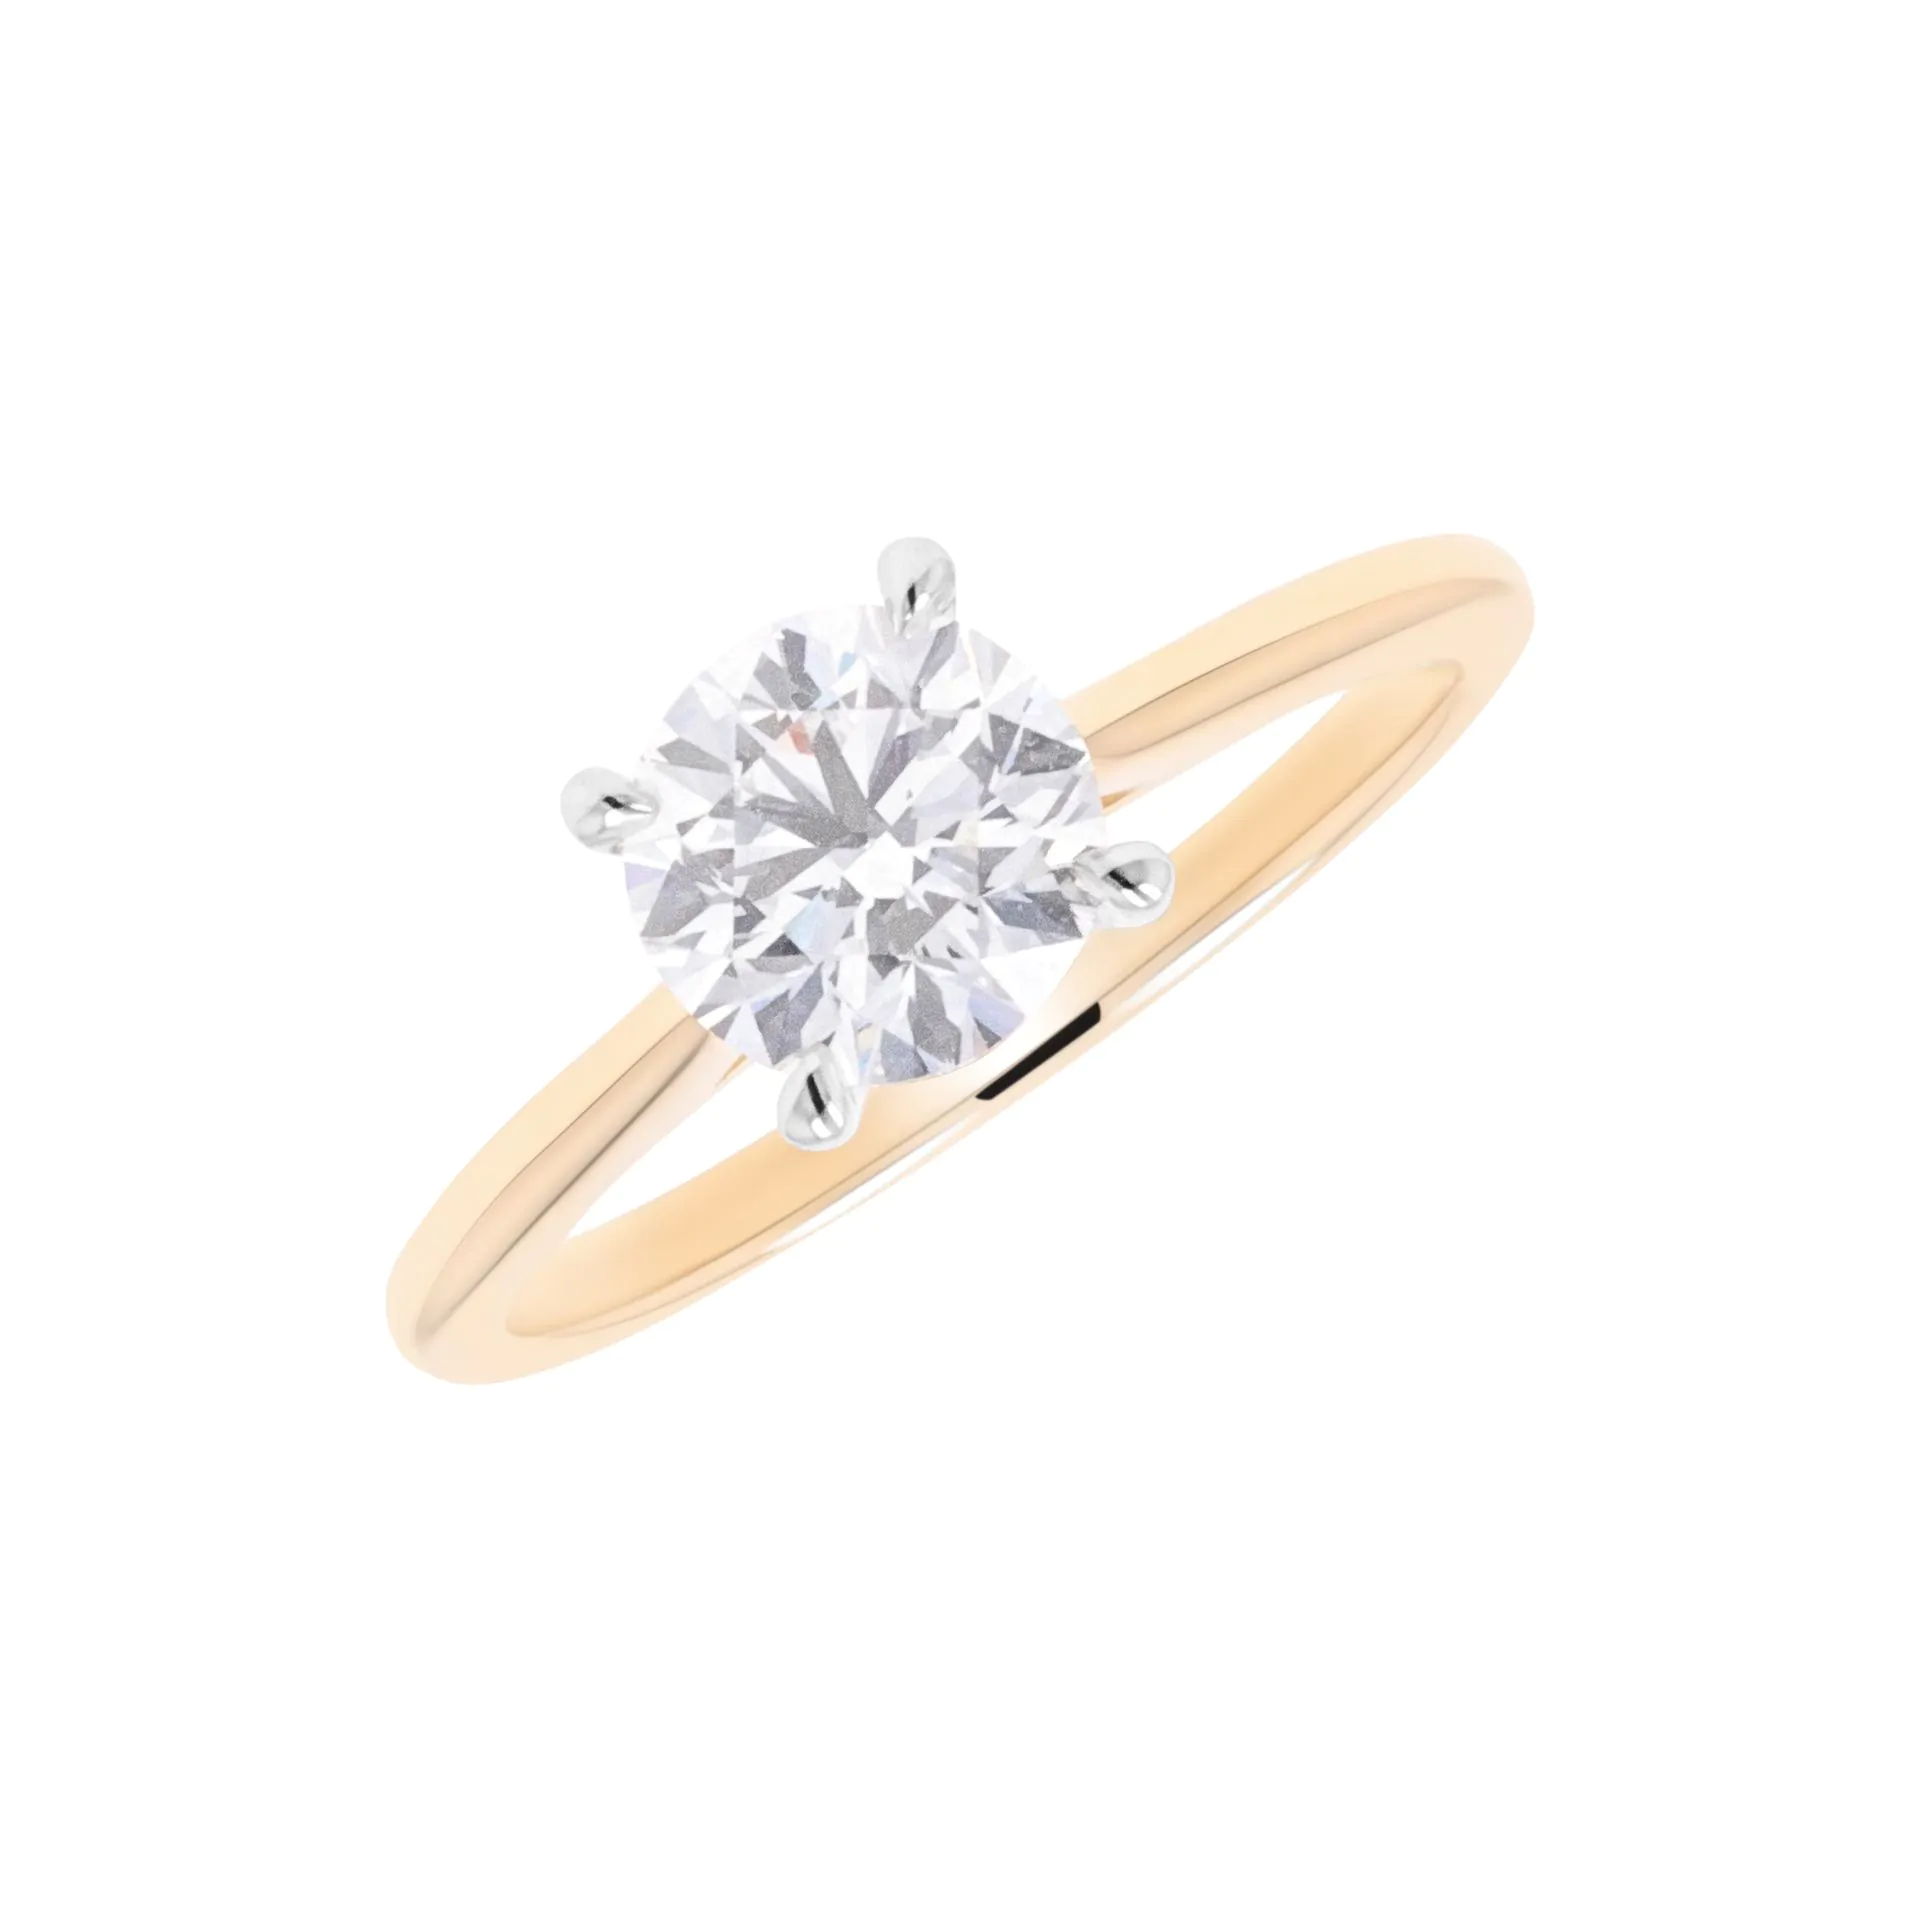 Wendy 18ct Yellow Gold and Platinum 1.20ct Brilliant Cut Diamond Solitaire Ring